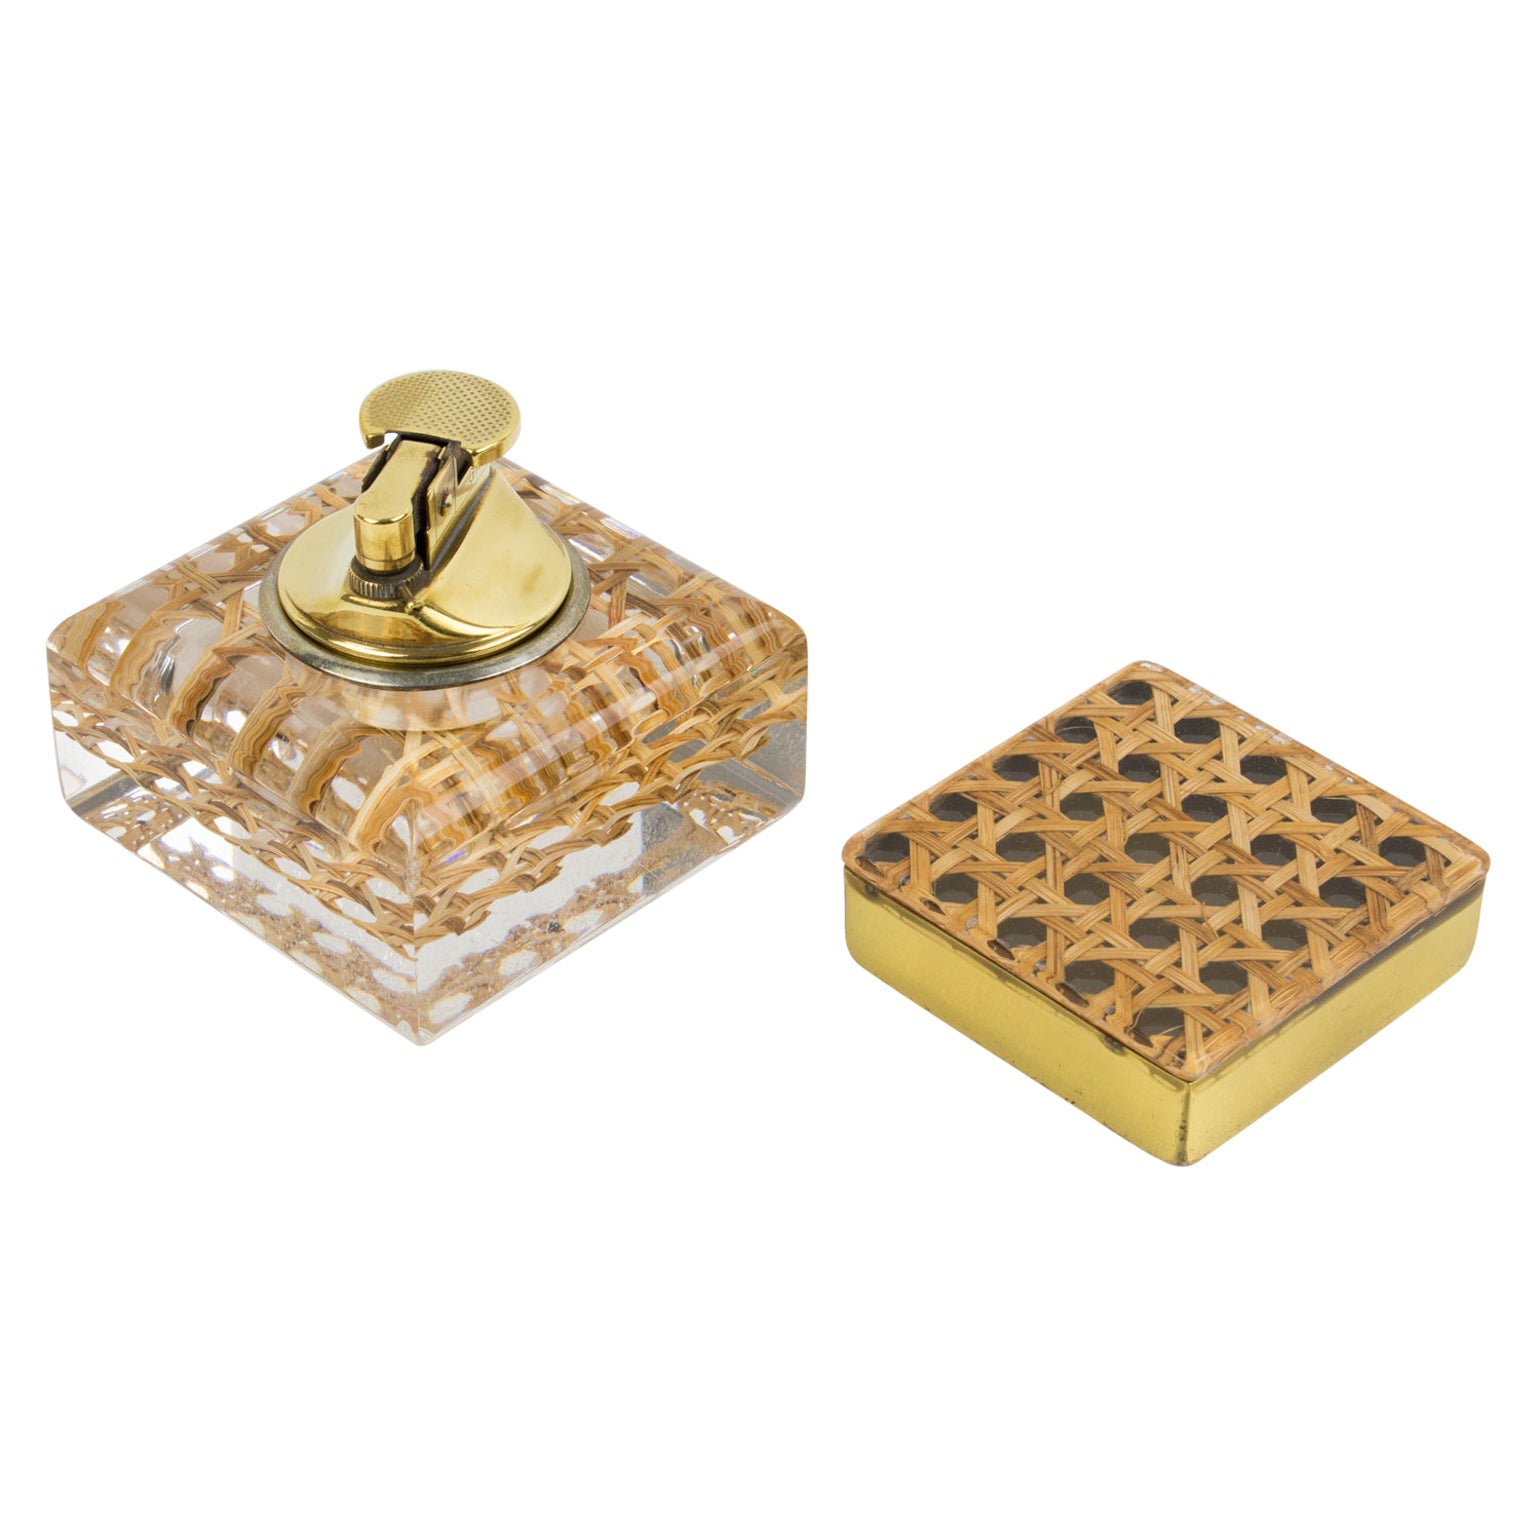 1970s Lucite, Rattan and Brass Smoking Set Lighter and Box